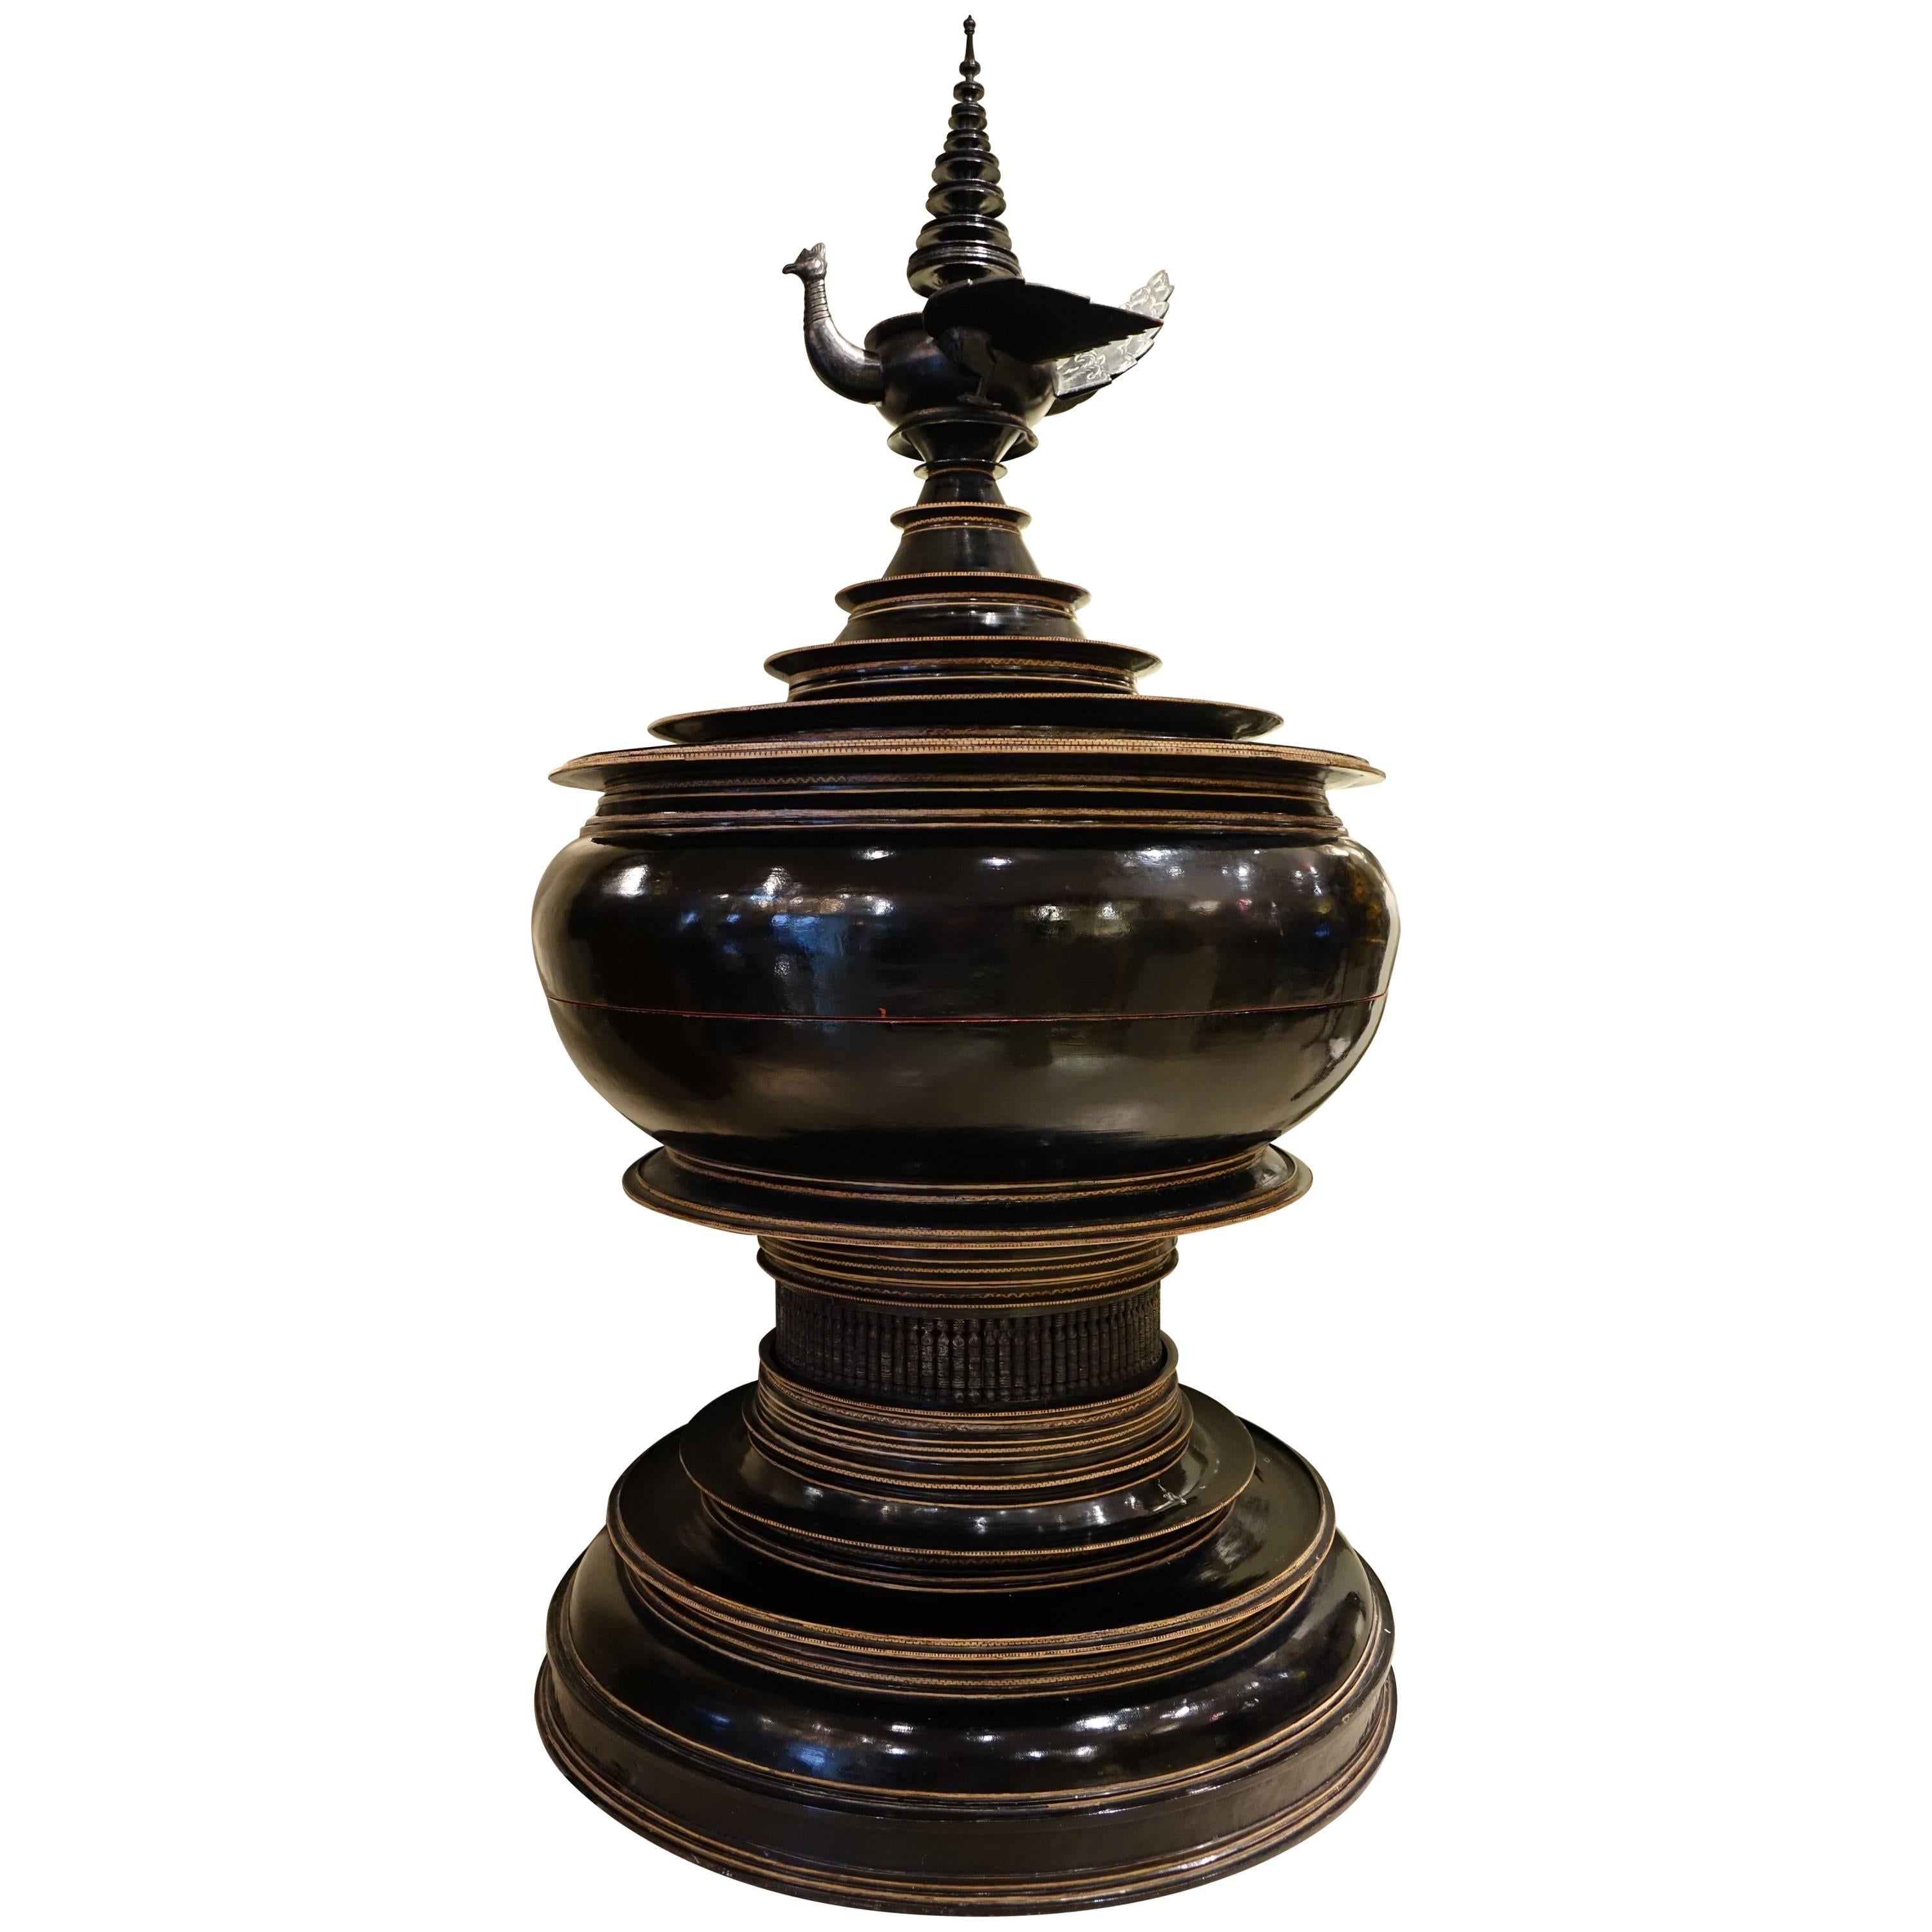 Huge Hsun-Owk Offering Box in Lacquer Burma, First Half of the 20th Century